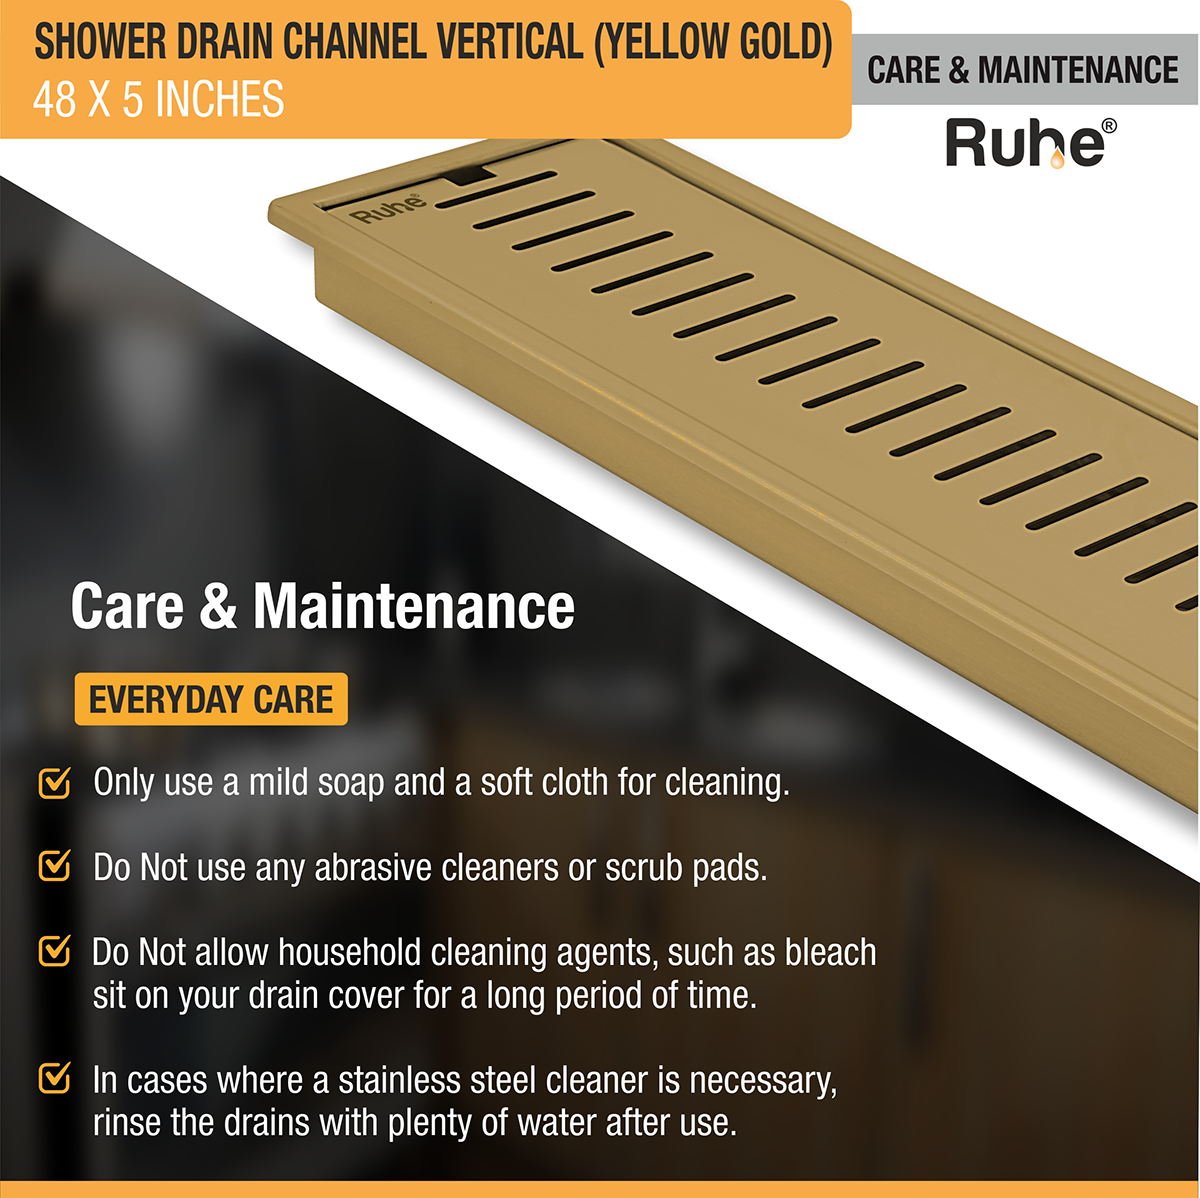 Vertical Shower Drain Channel (48 x 5 Inches) YELLOW GOLD care and maintenance